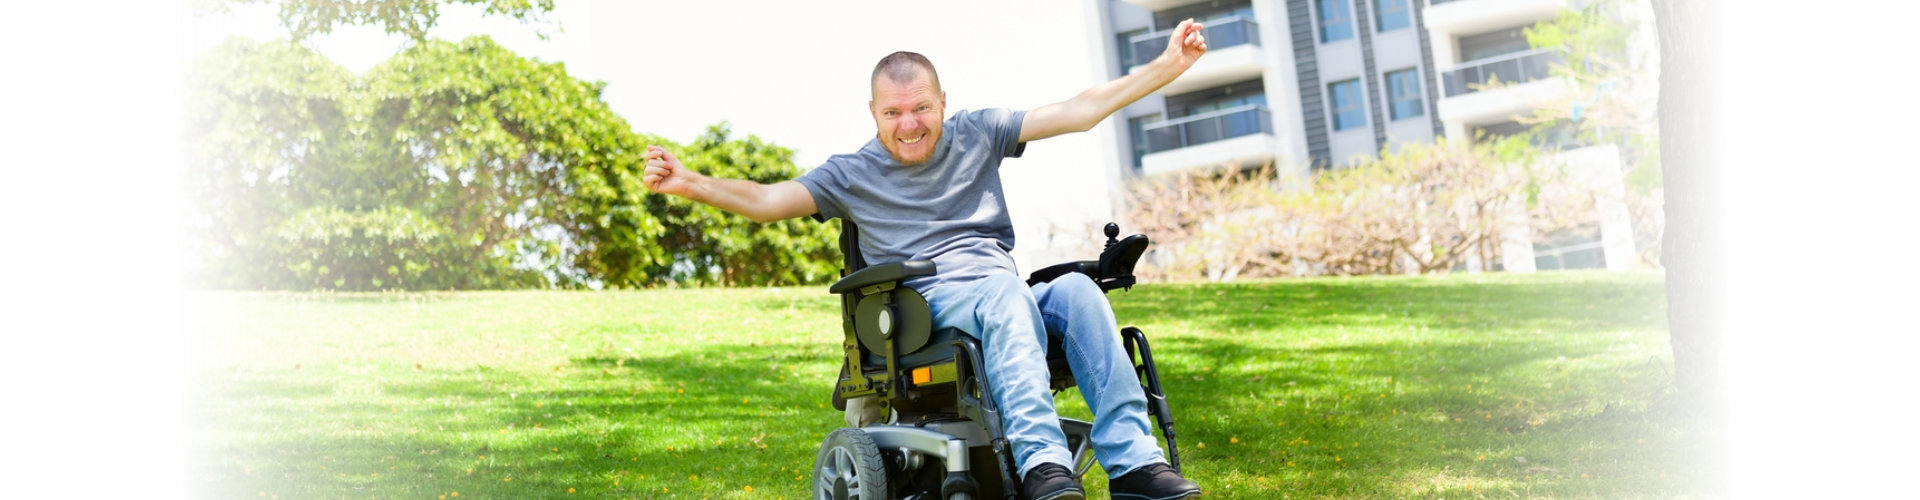 happy patient on a wheelchair